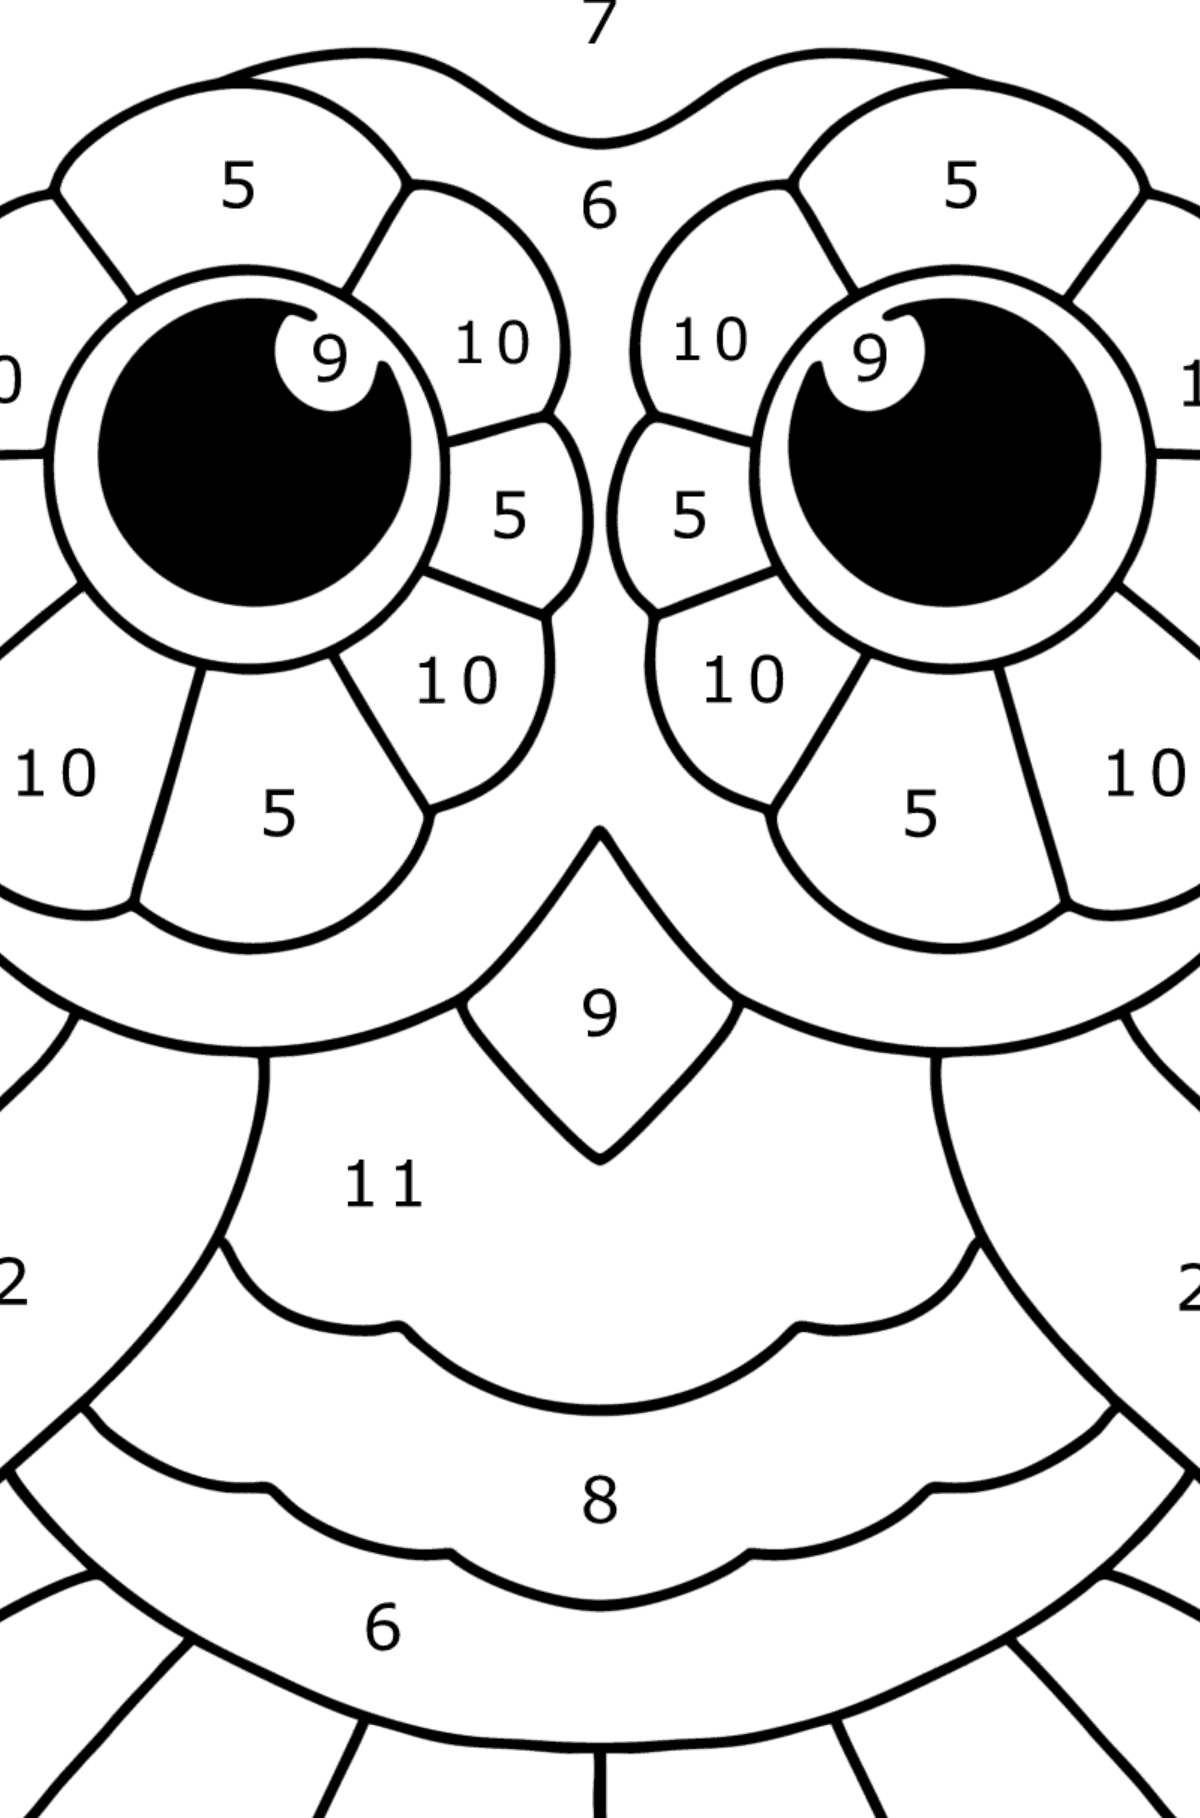 Easy stress relief coloring page - Owl - Coloring by Numbers for Kids